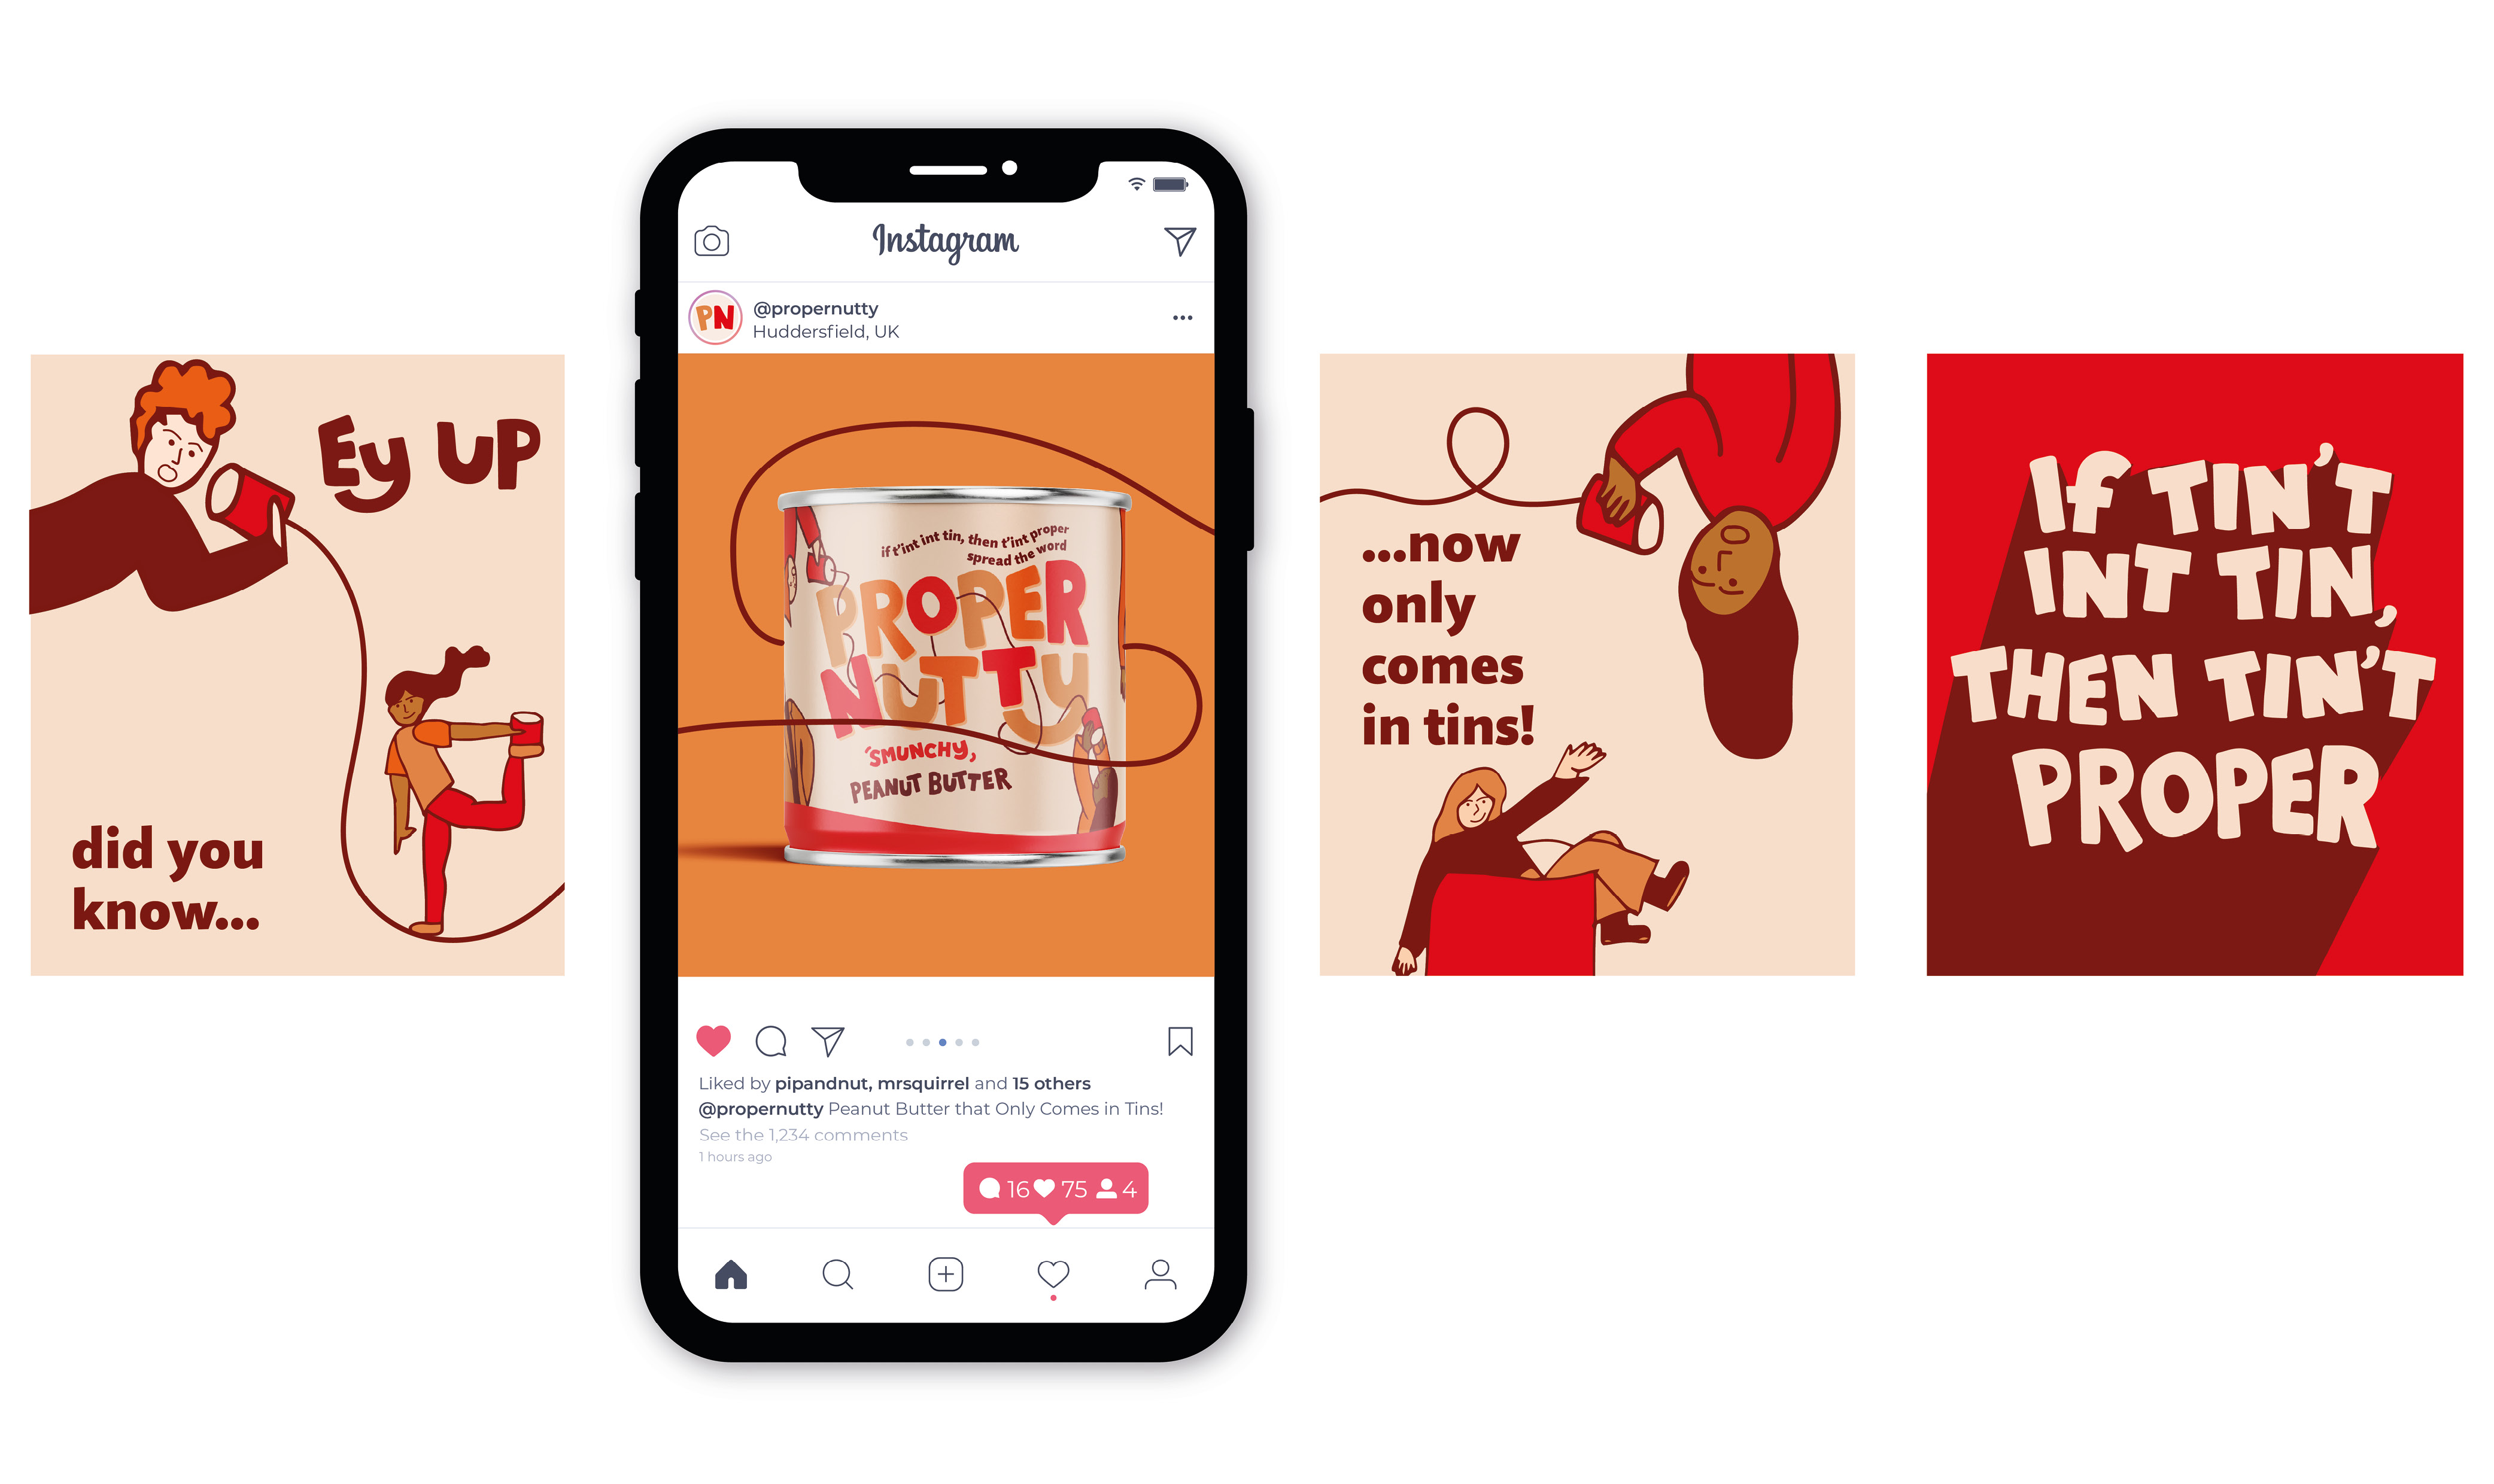 Graphic Design work by Magdalena Horos showing Proper Nutty Instagram posts advertising that the peanut butter now only comes in tins.